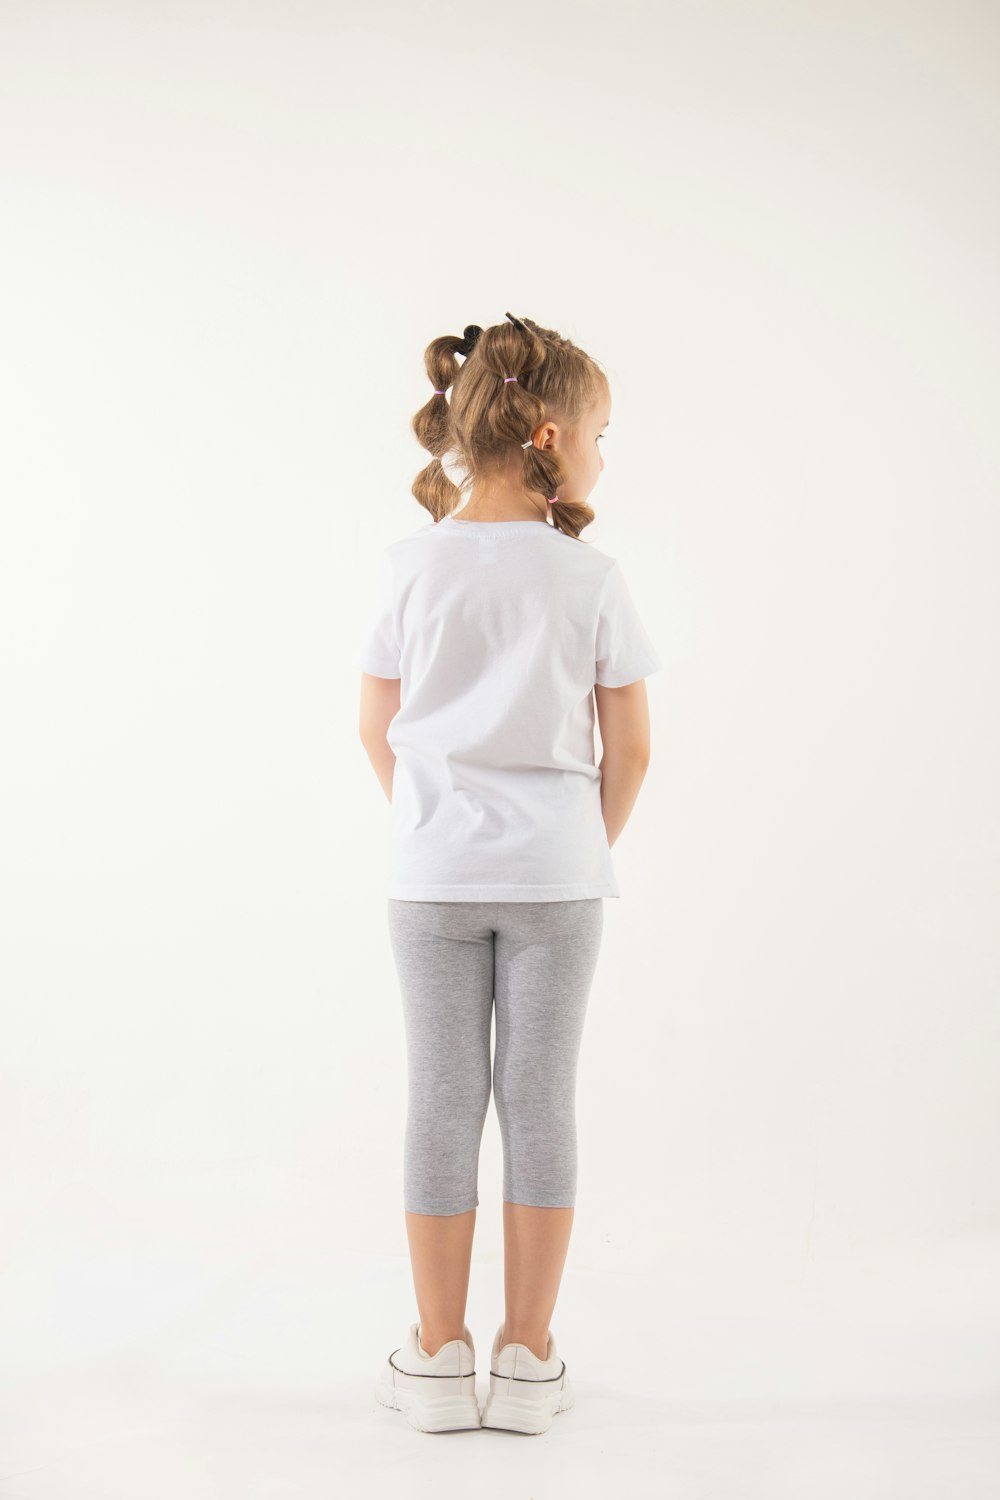 a little girl standing in front of a white background